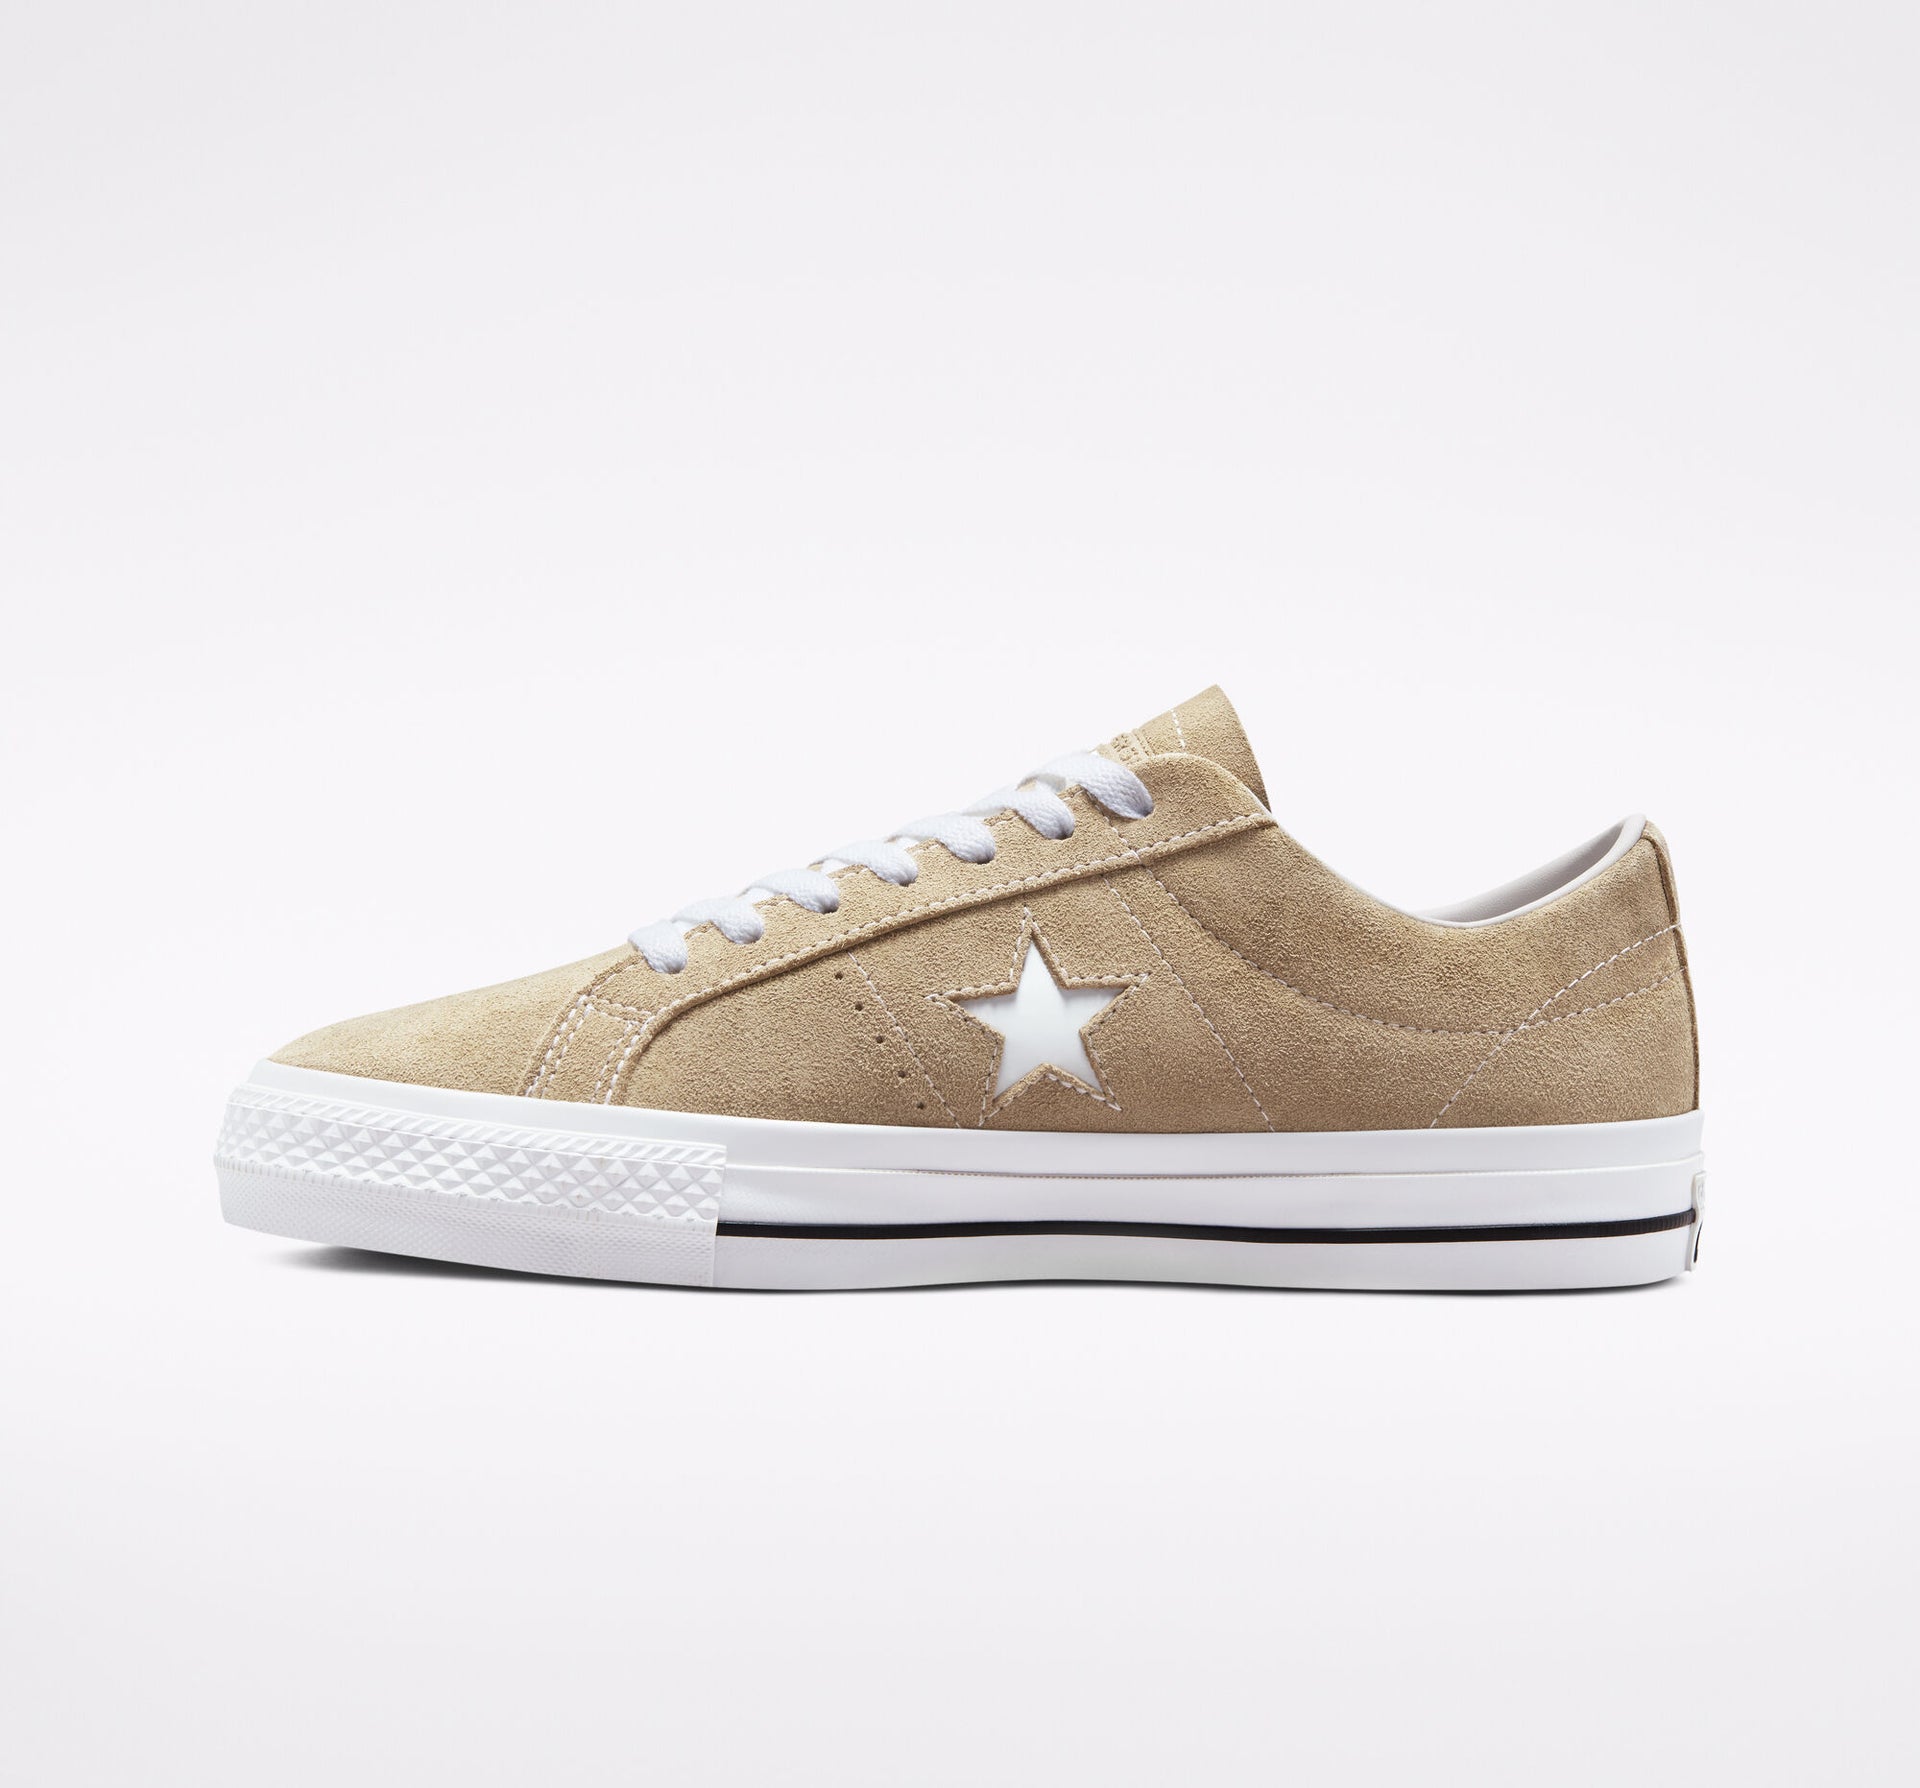 Converse Cons One Pro - NWSTORE